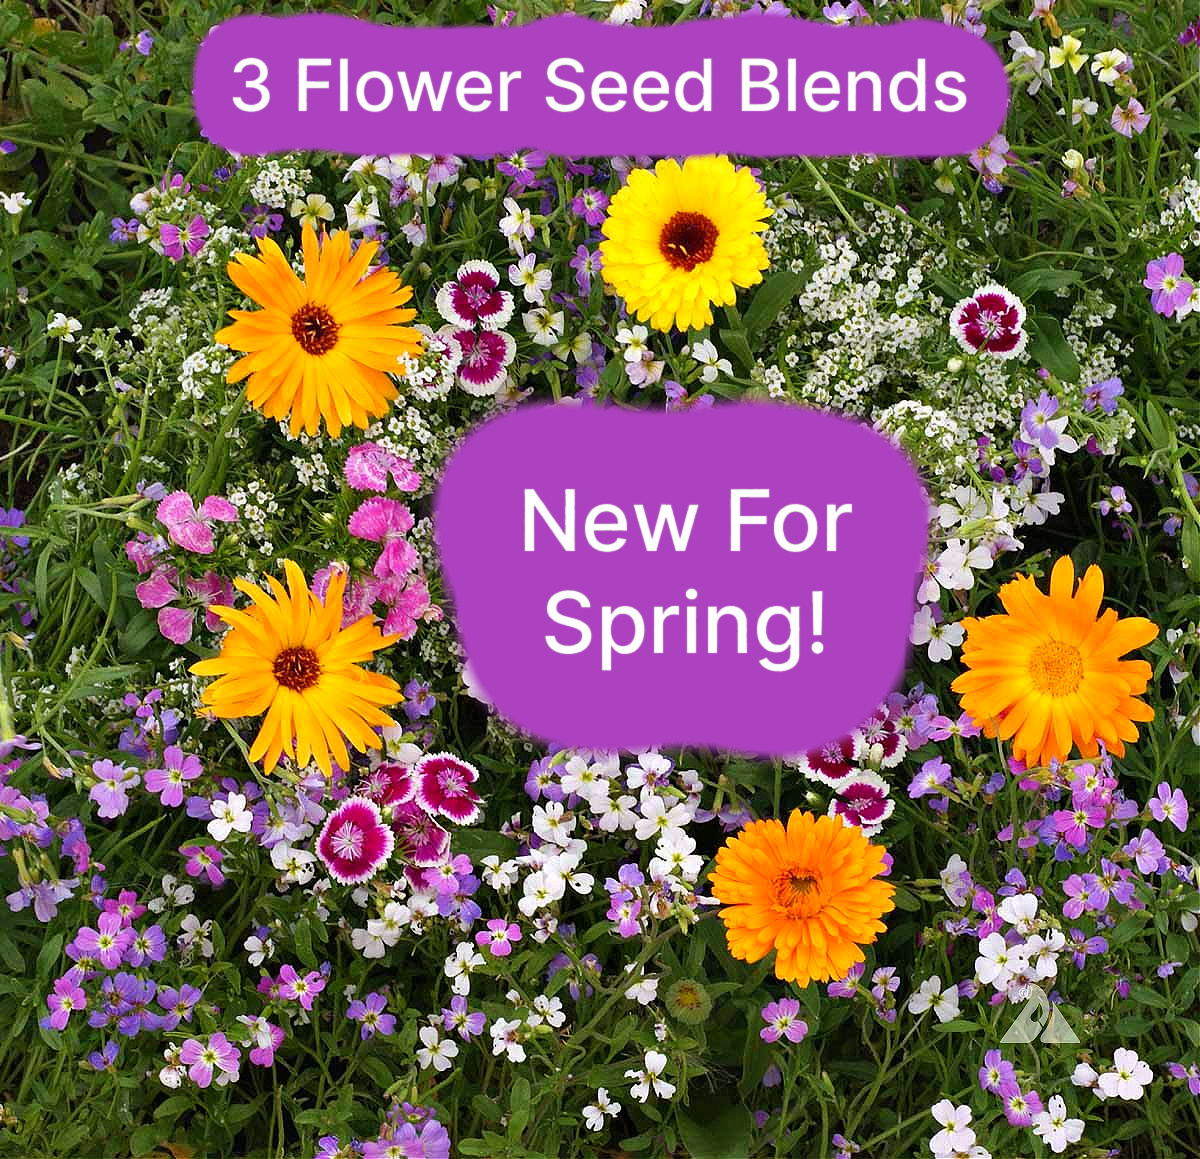 New Flower Seed Mixes for Homeowners